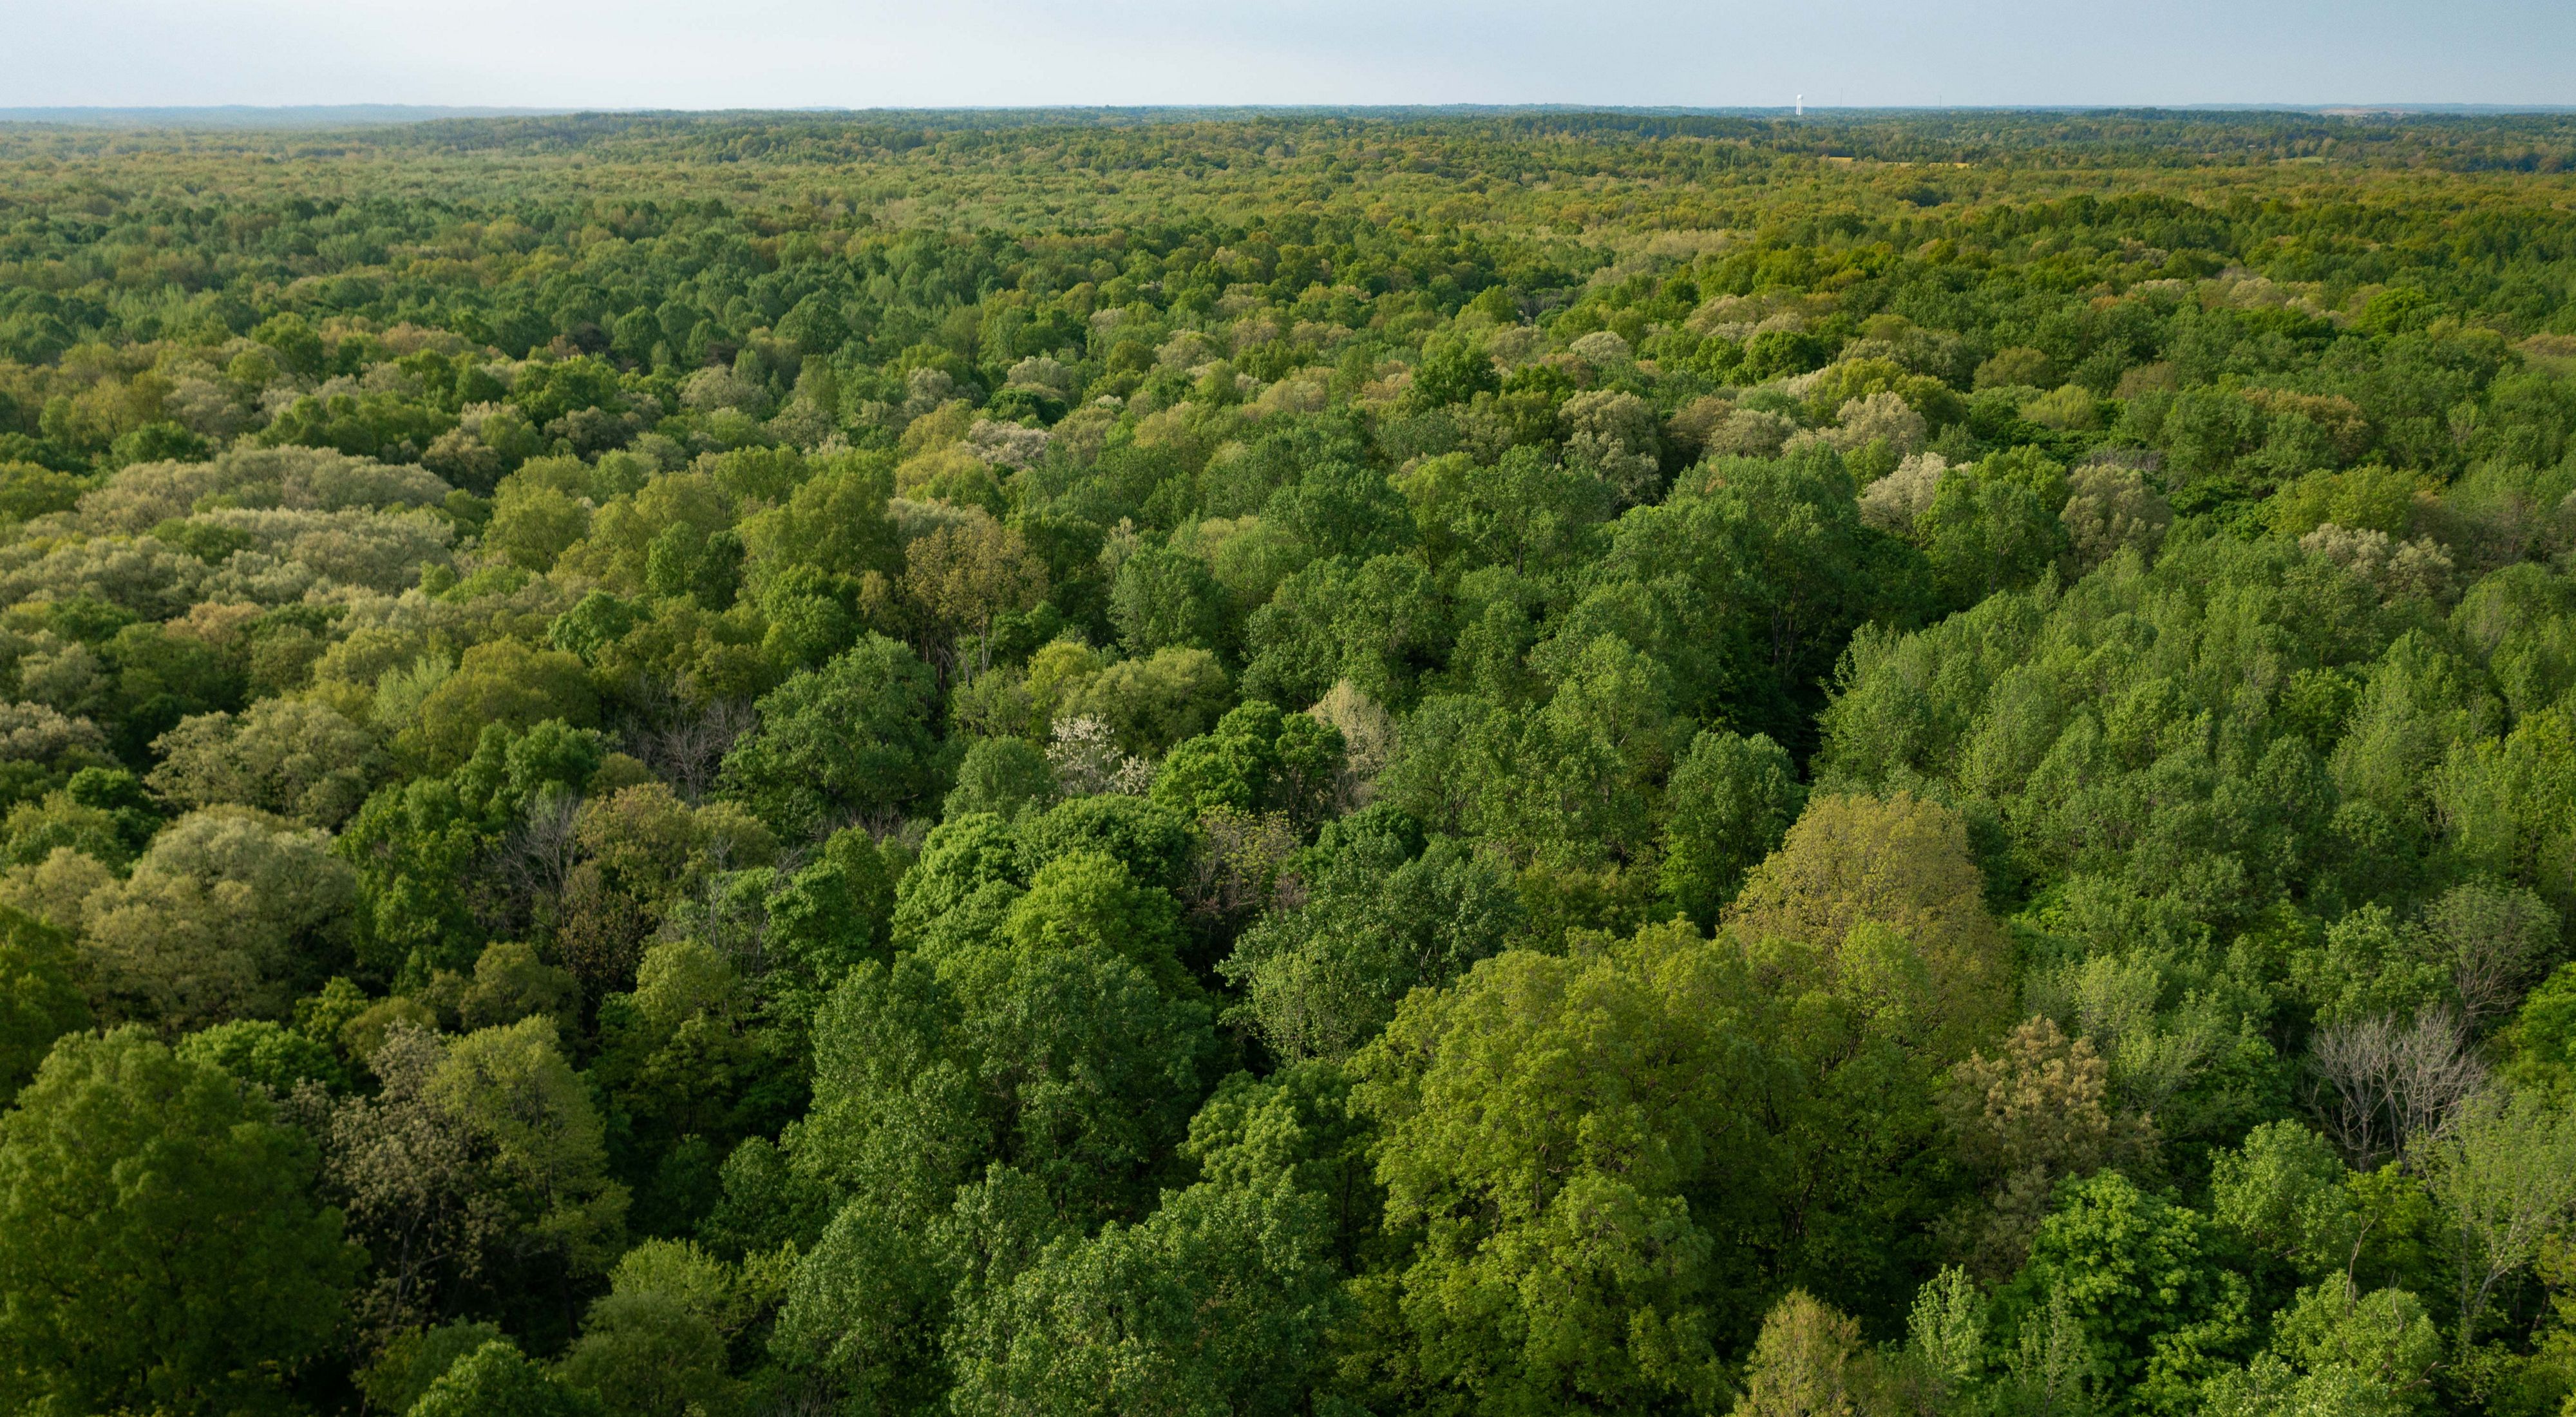 Aerial view of lush green forest at Patoka River National Wildlife Refuge.